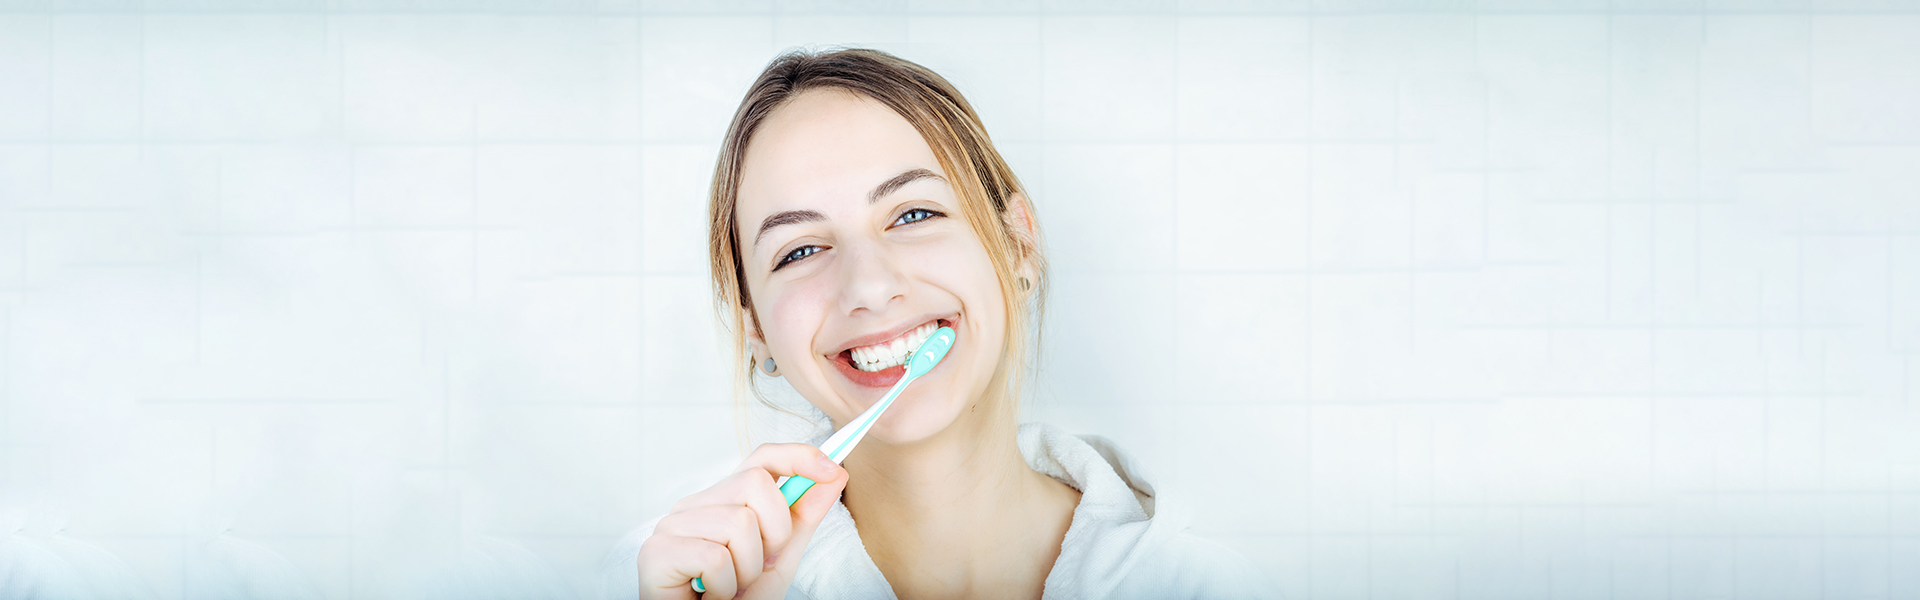 How To Strengthen Your Teeth With Fluoride Treatment.